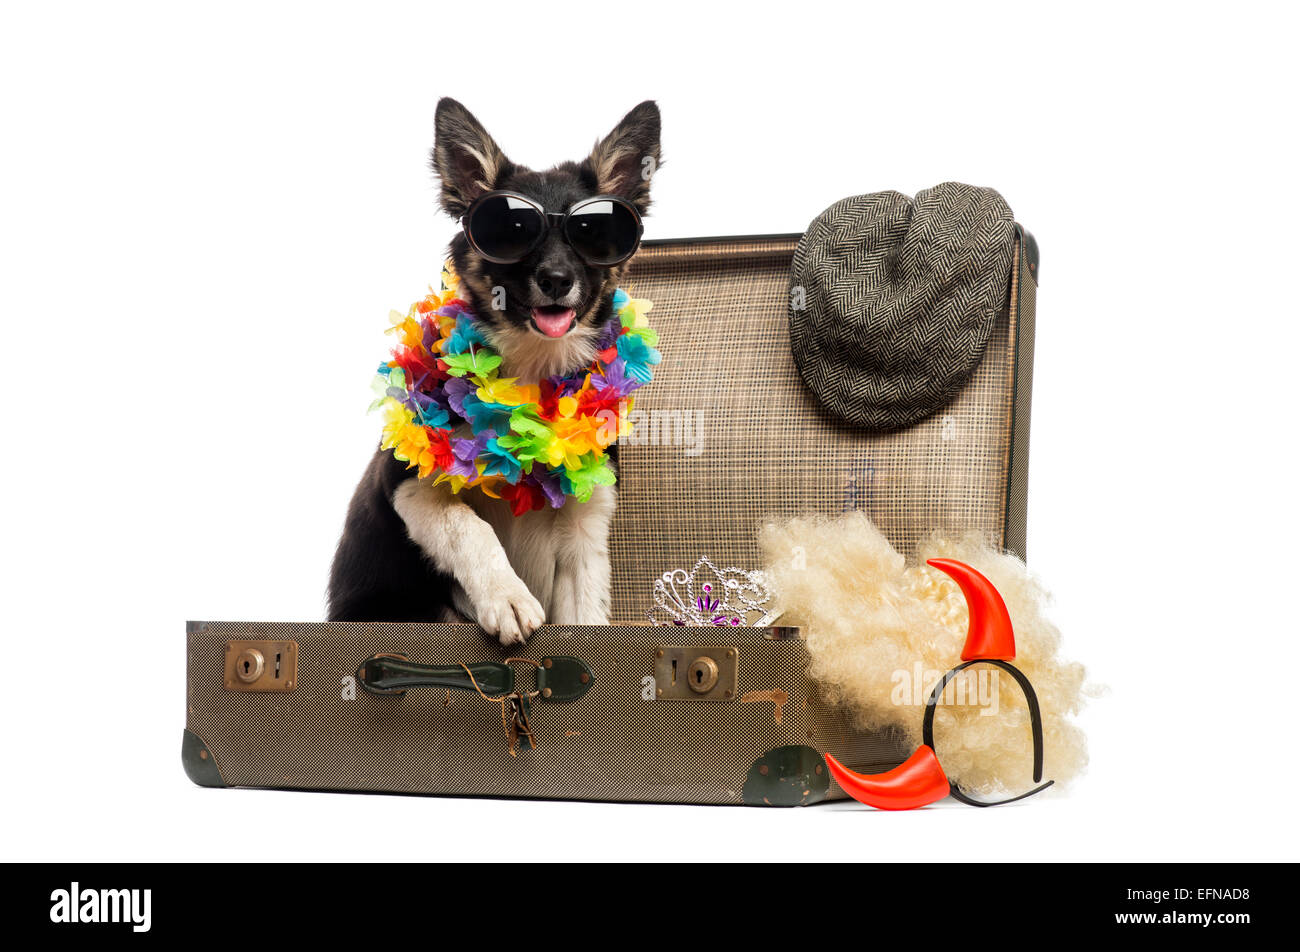 Border collie sitting in an old vintage suitcase full of accessories against white background Stock Photo